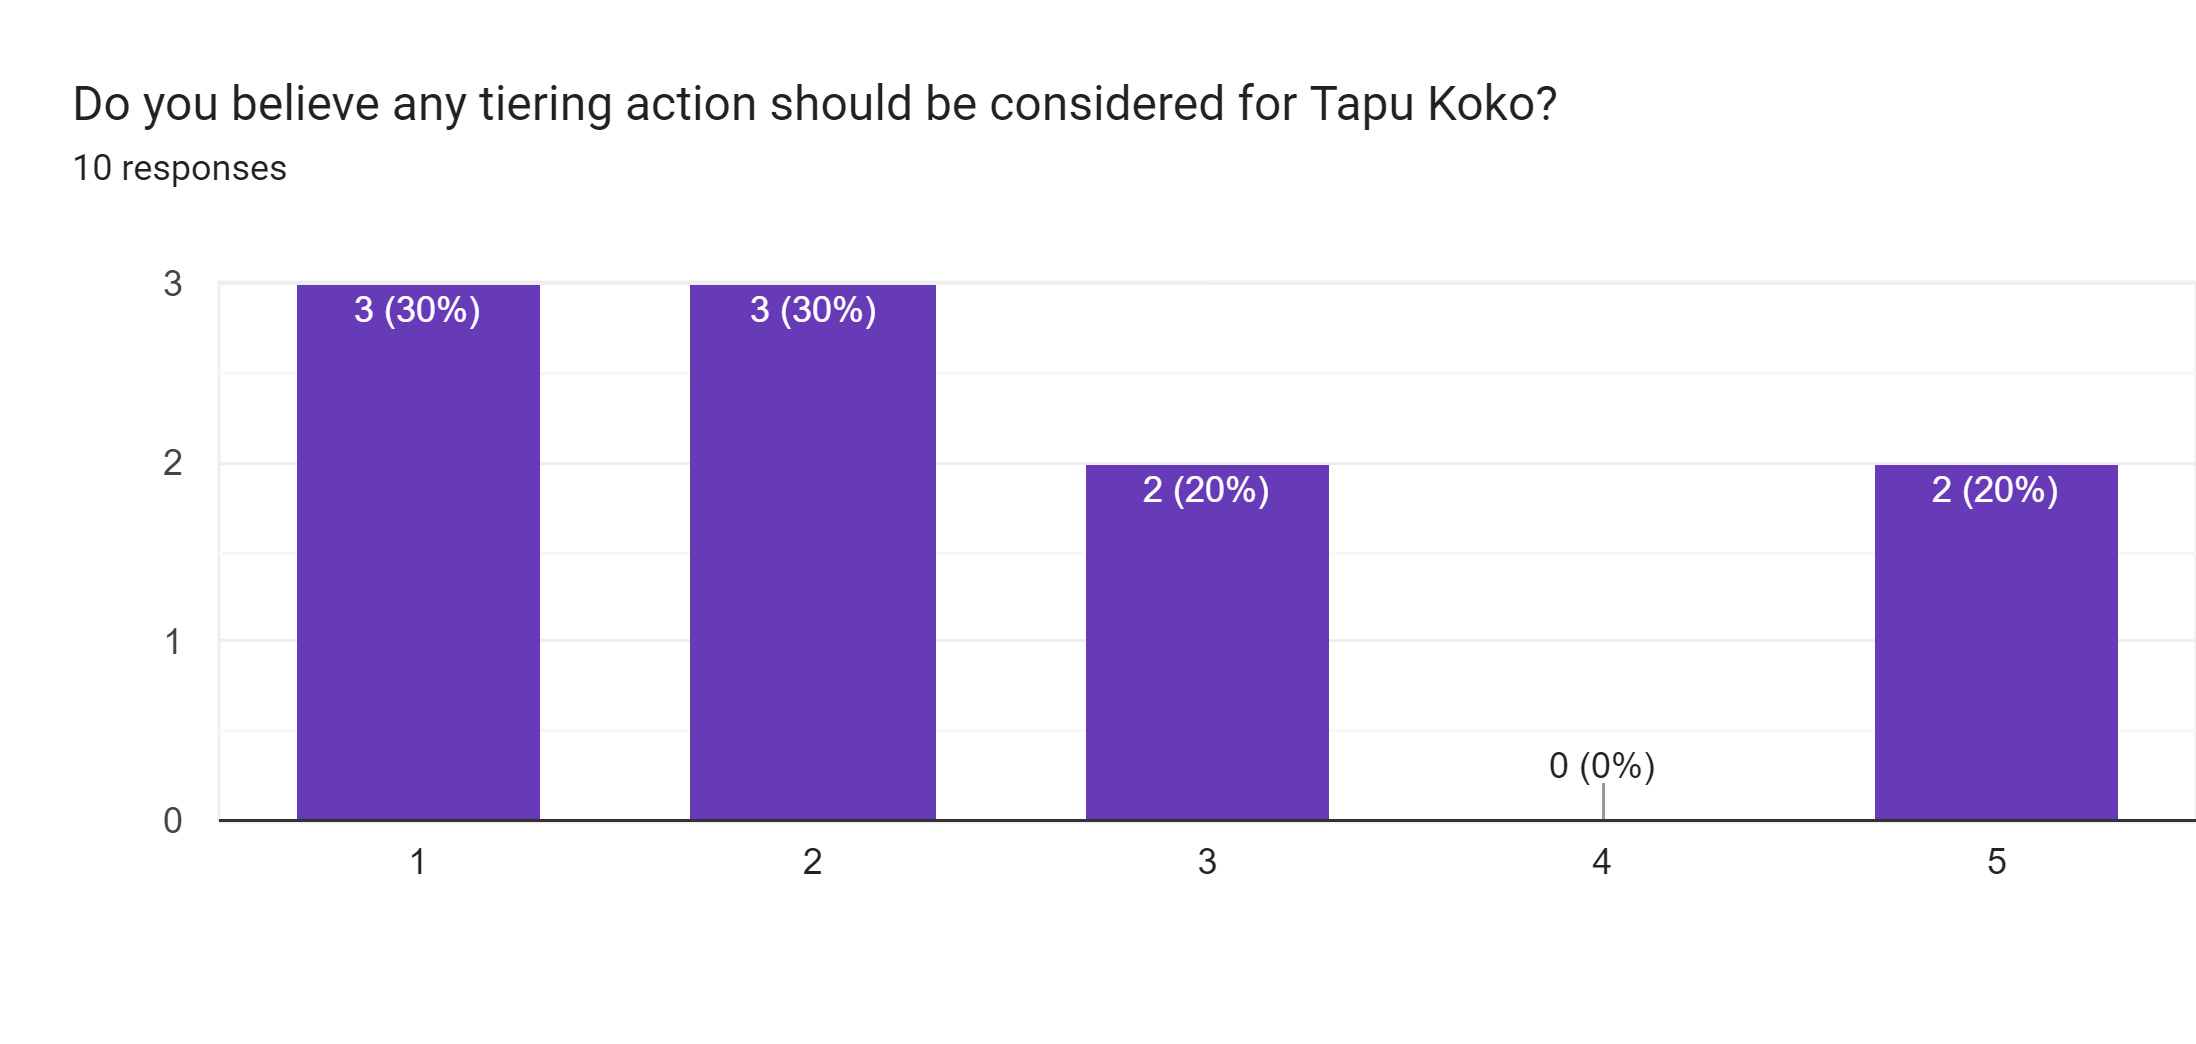 Forms response chart. Question title: Do you believe any tiering action should be considered for Tapu Koko?. Number of responses: 10 responses.